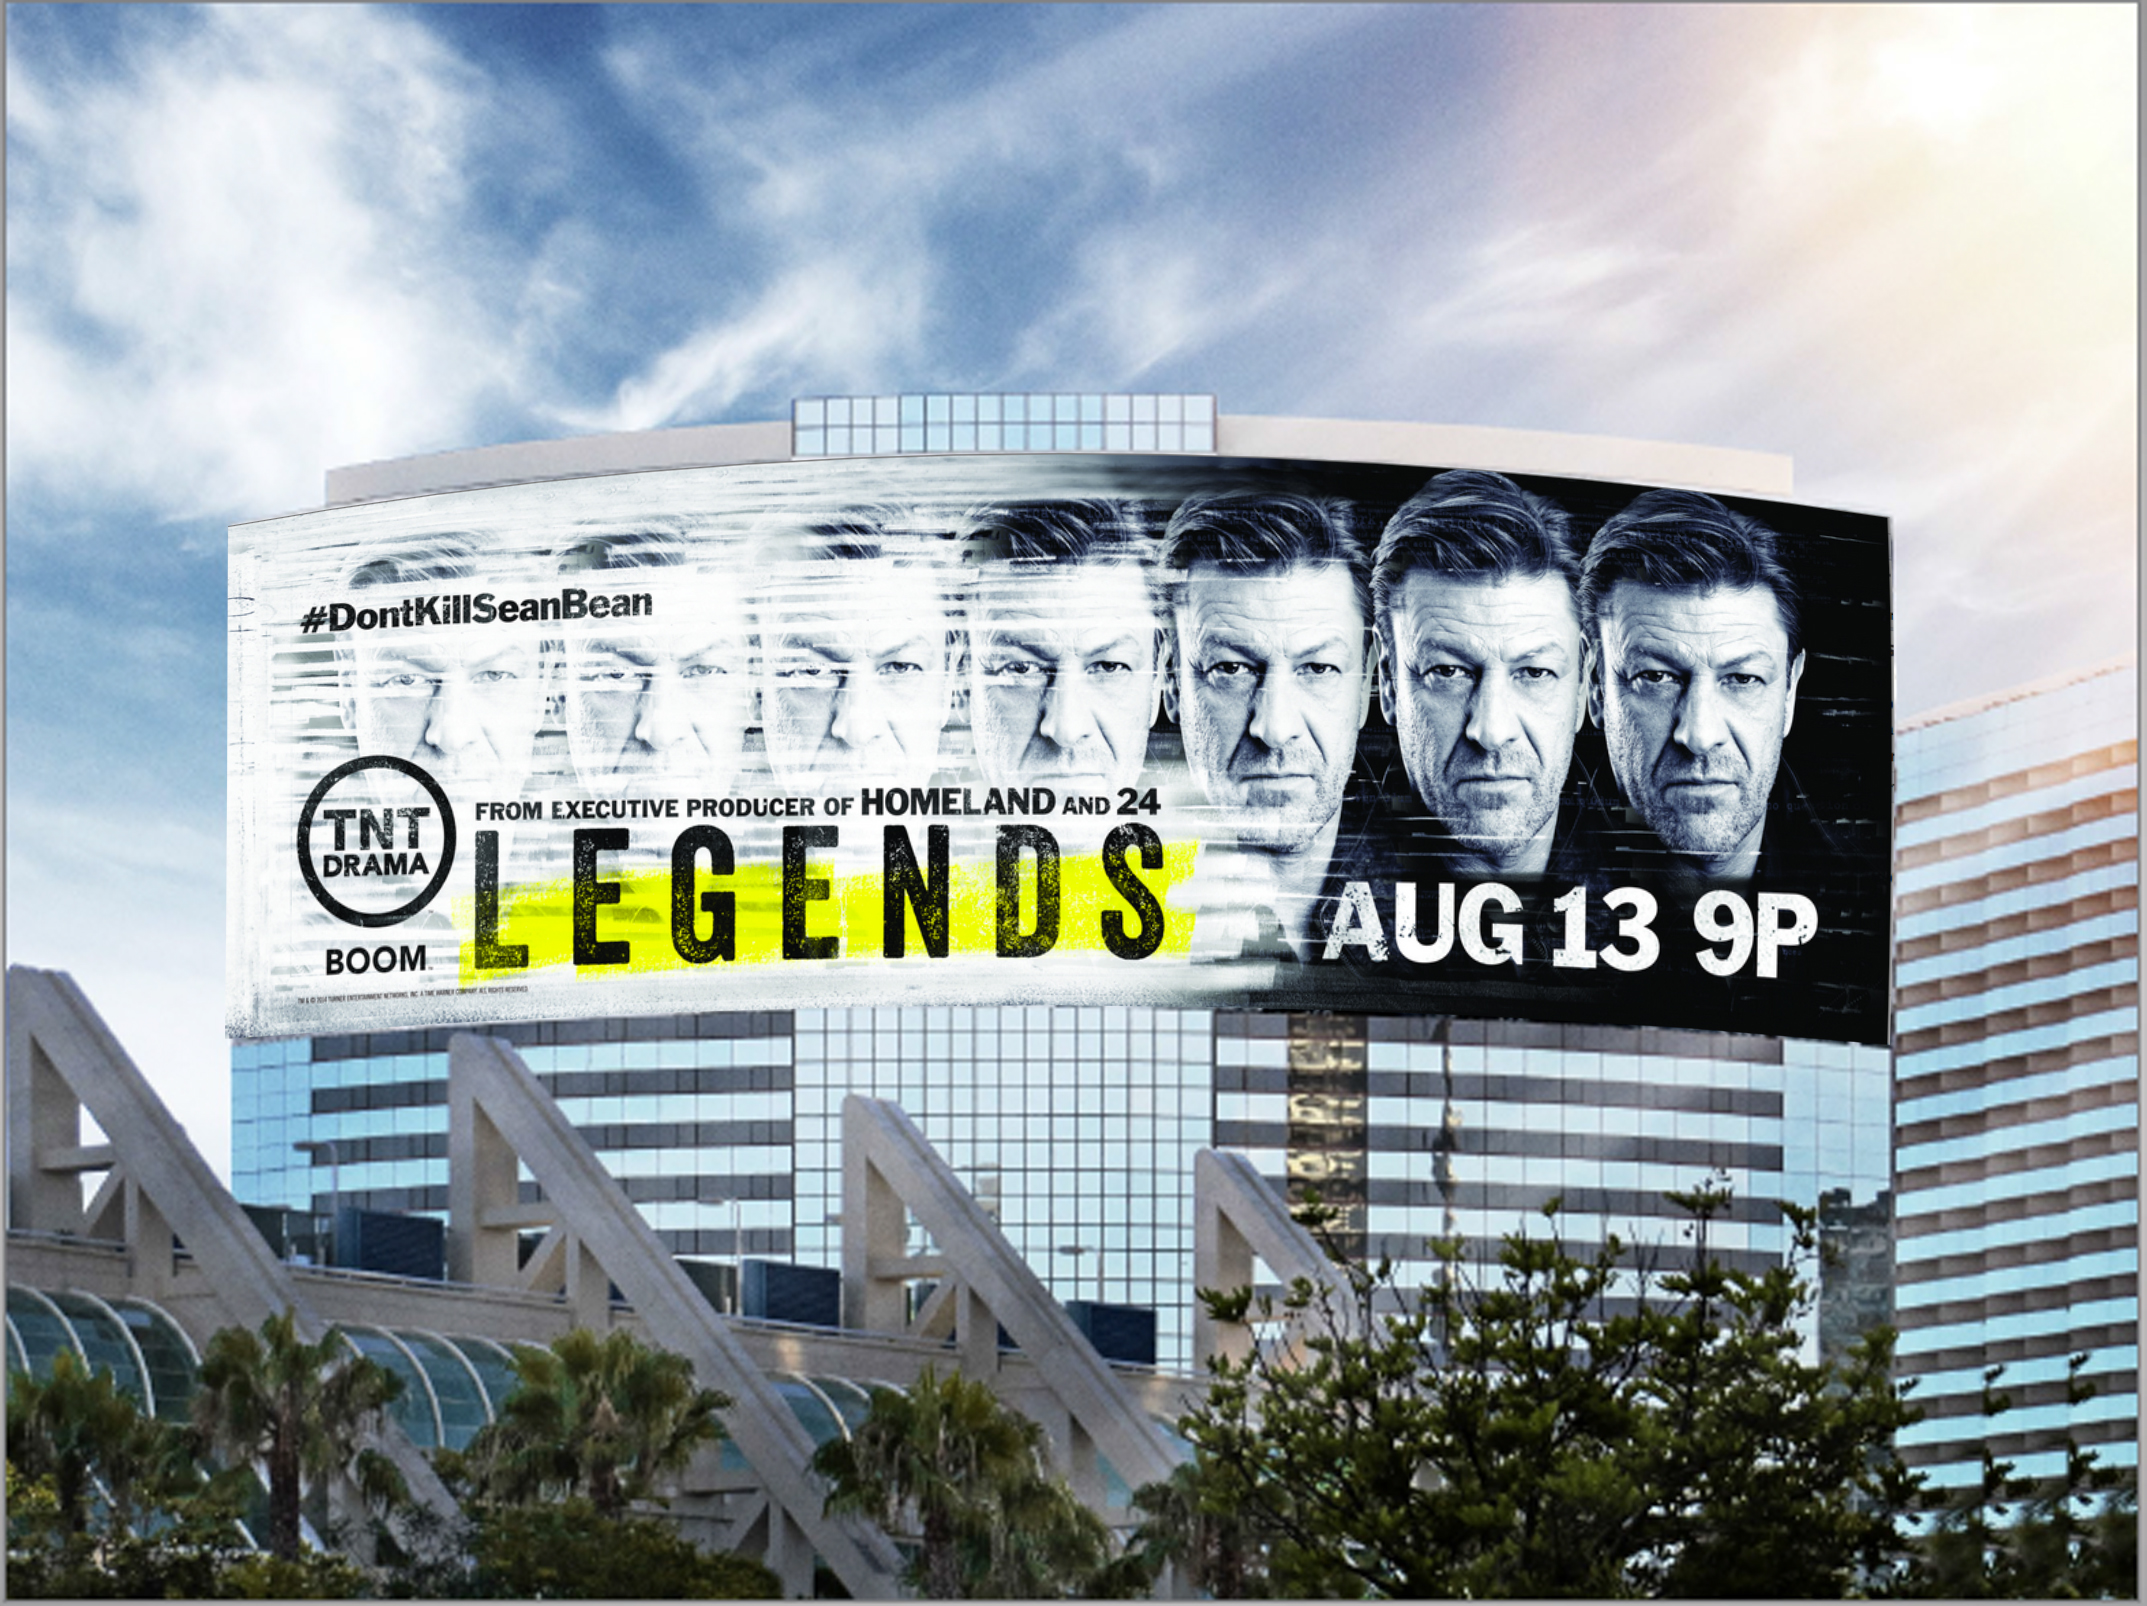 TNT’s Legends Takes Over the Skies at SDCC 2014